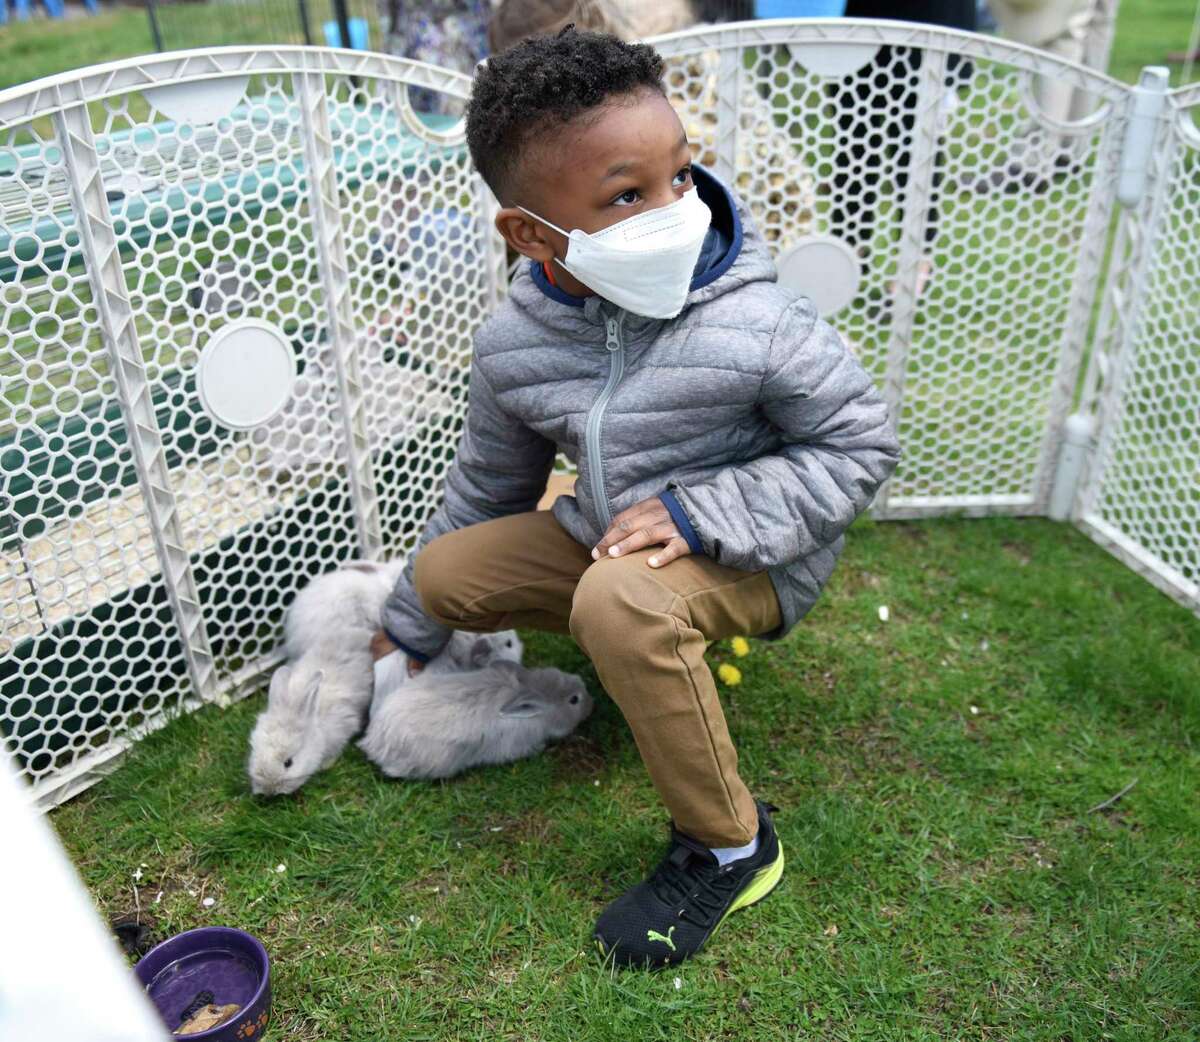 Greenwich's Peter M., 6, pets bunnies at Second Congregational Church in Greenwich, Conn. Sunday, April 17, 2022. Following Easter services, children set out to hunt for candy-filled Easter eggs on the church lawn. There were also live bunnies and goats on hand for kids to pet.